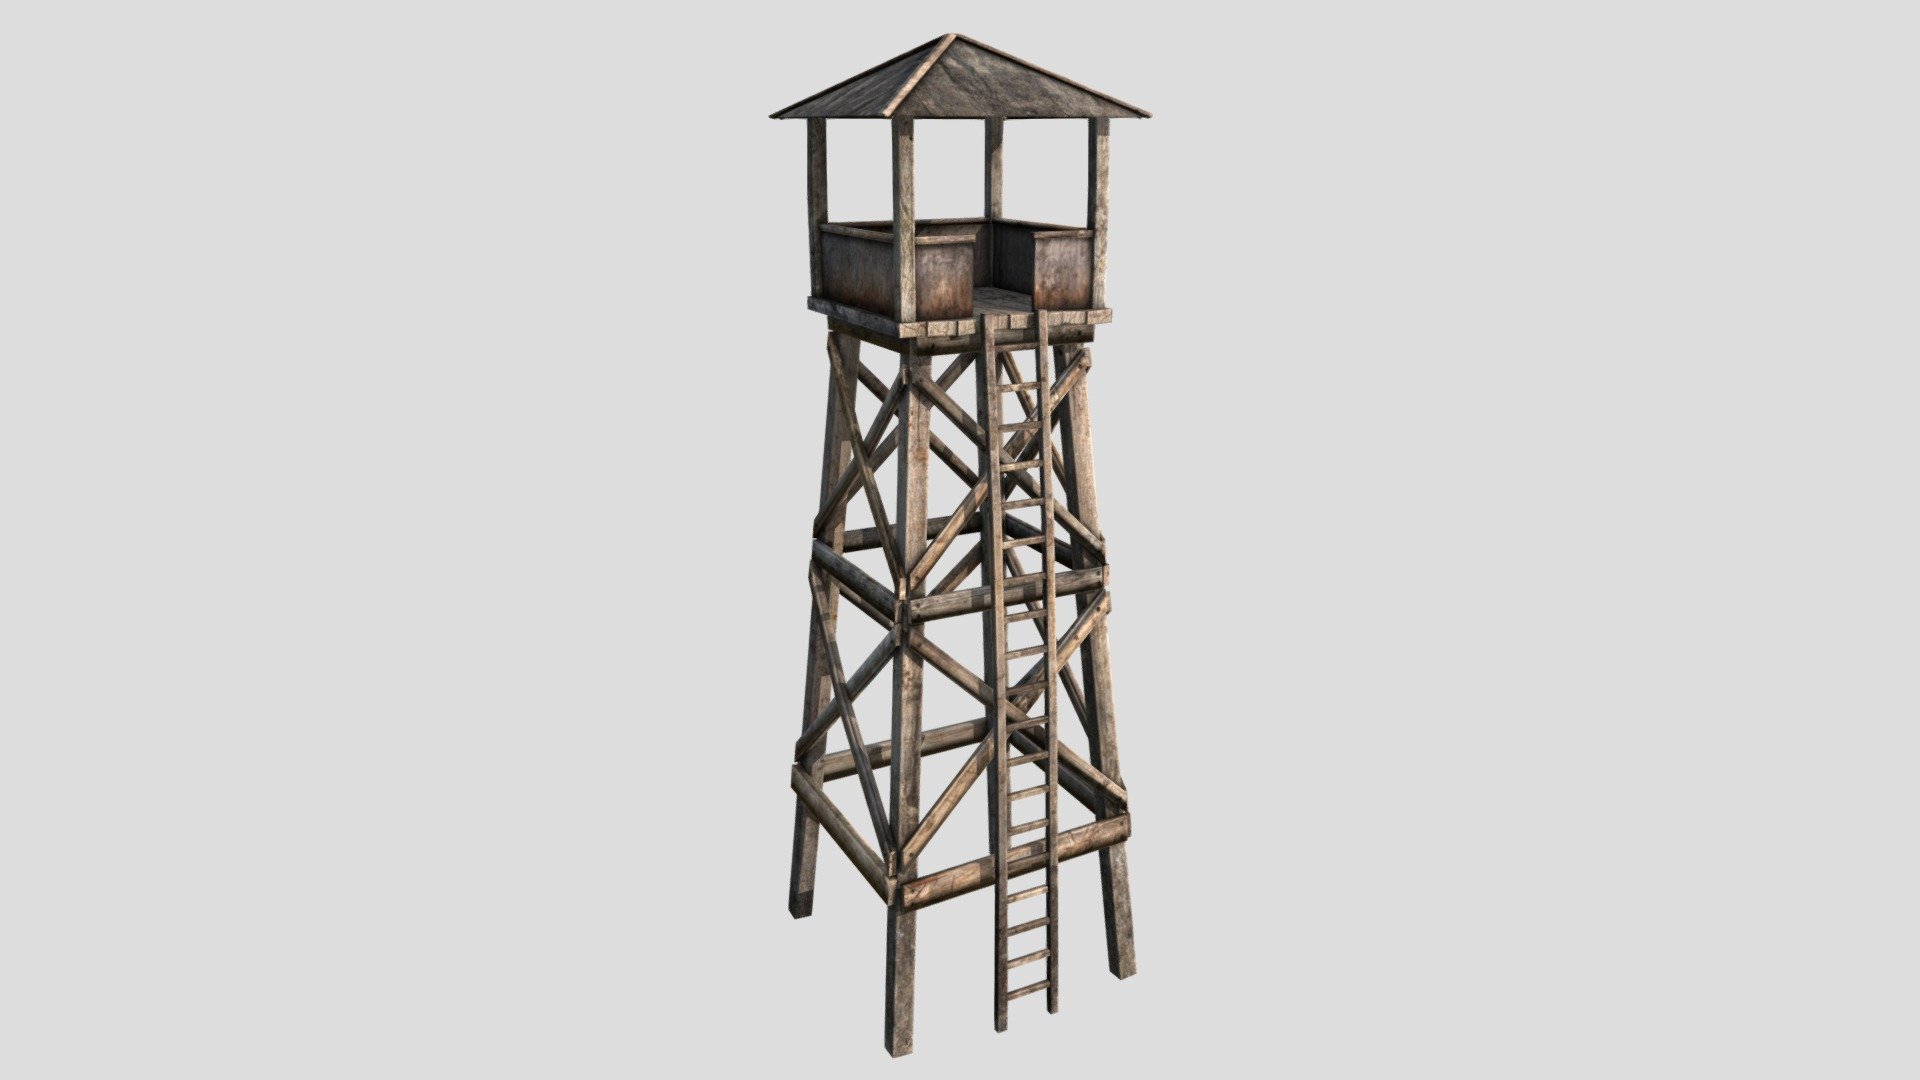 3D Guard Tower
The pack has highly detailed guard tower ready for use in your project. Just drag and drop prefabs into your scene and achieve beautiful results in no time. Available formats FBX, 3DS Max 2017



We are here to empower the creators. Please contact us via the [Contact US](https://aaanimators.com/#contact-area) page if you are having issues with our assets. 




The following document provides a highly detailed description of the asset:
[READ ME]()




**Mesh complexities:**


Guard_Tower_06 1382 verts; 1074 tris uv 

Includes 1 set of textures with 4 materials:


 ● Diffuse

 ● Gloss

 ● Normal

 ● Specular




 - Guard Tower 06 - Buy Royalty Free 3D model by aaanimators 3d model